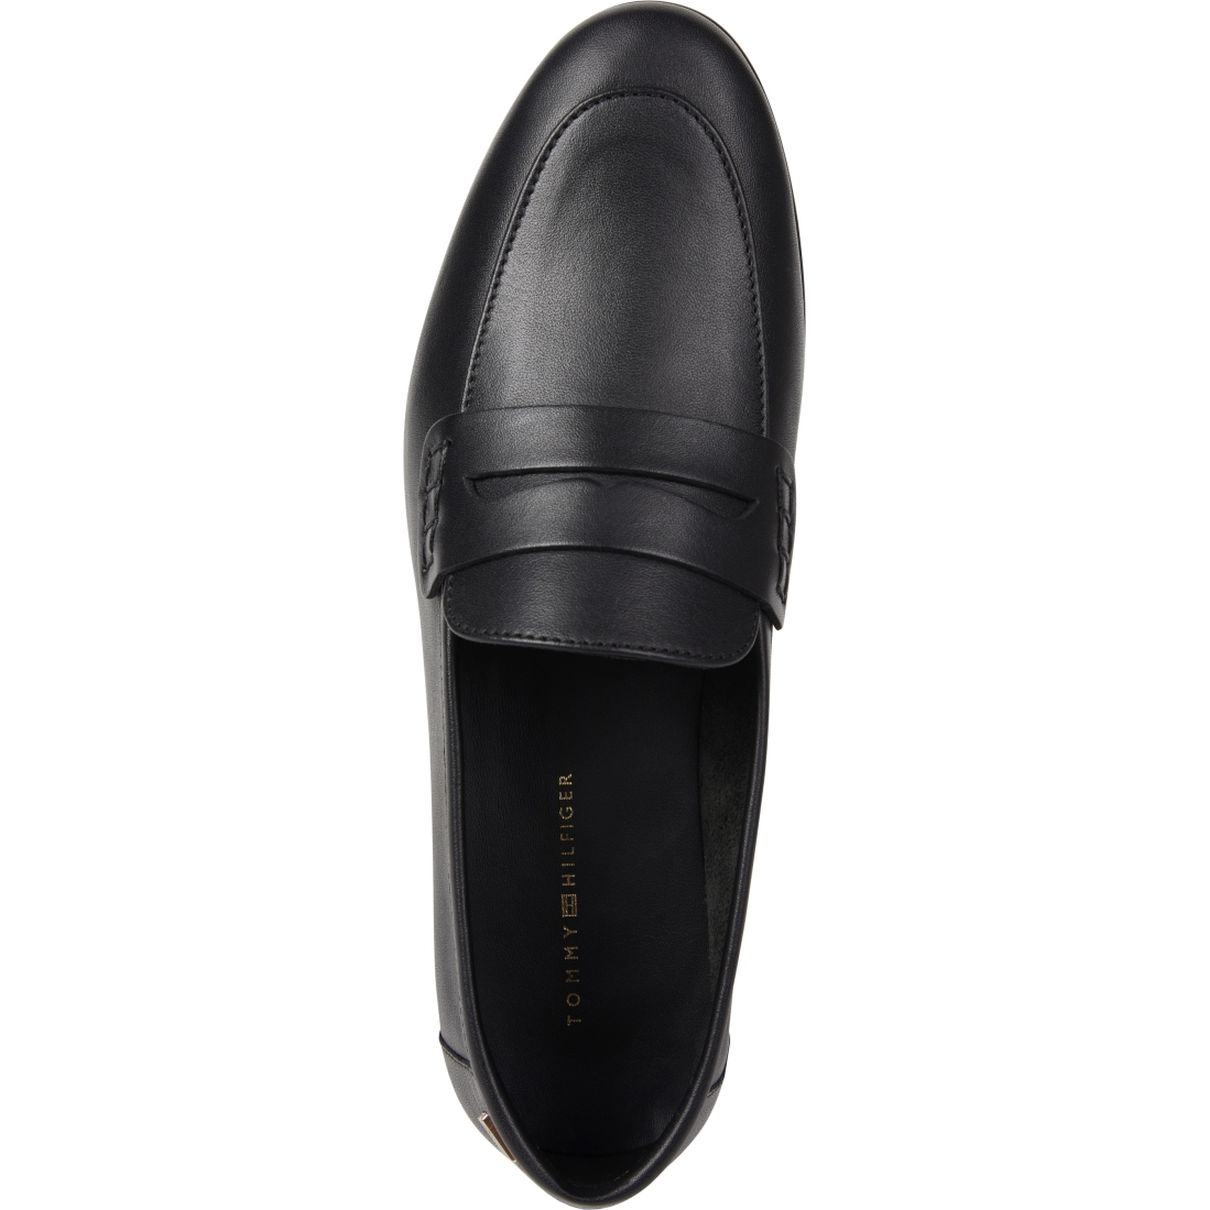 TOMMY HILFIGER loafer tipo bateliai moterims, Juoda, Essential loafer